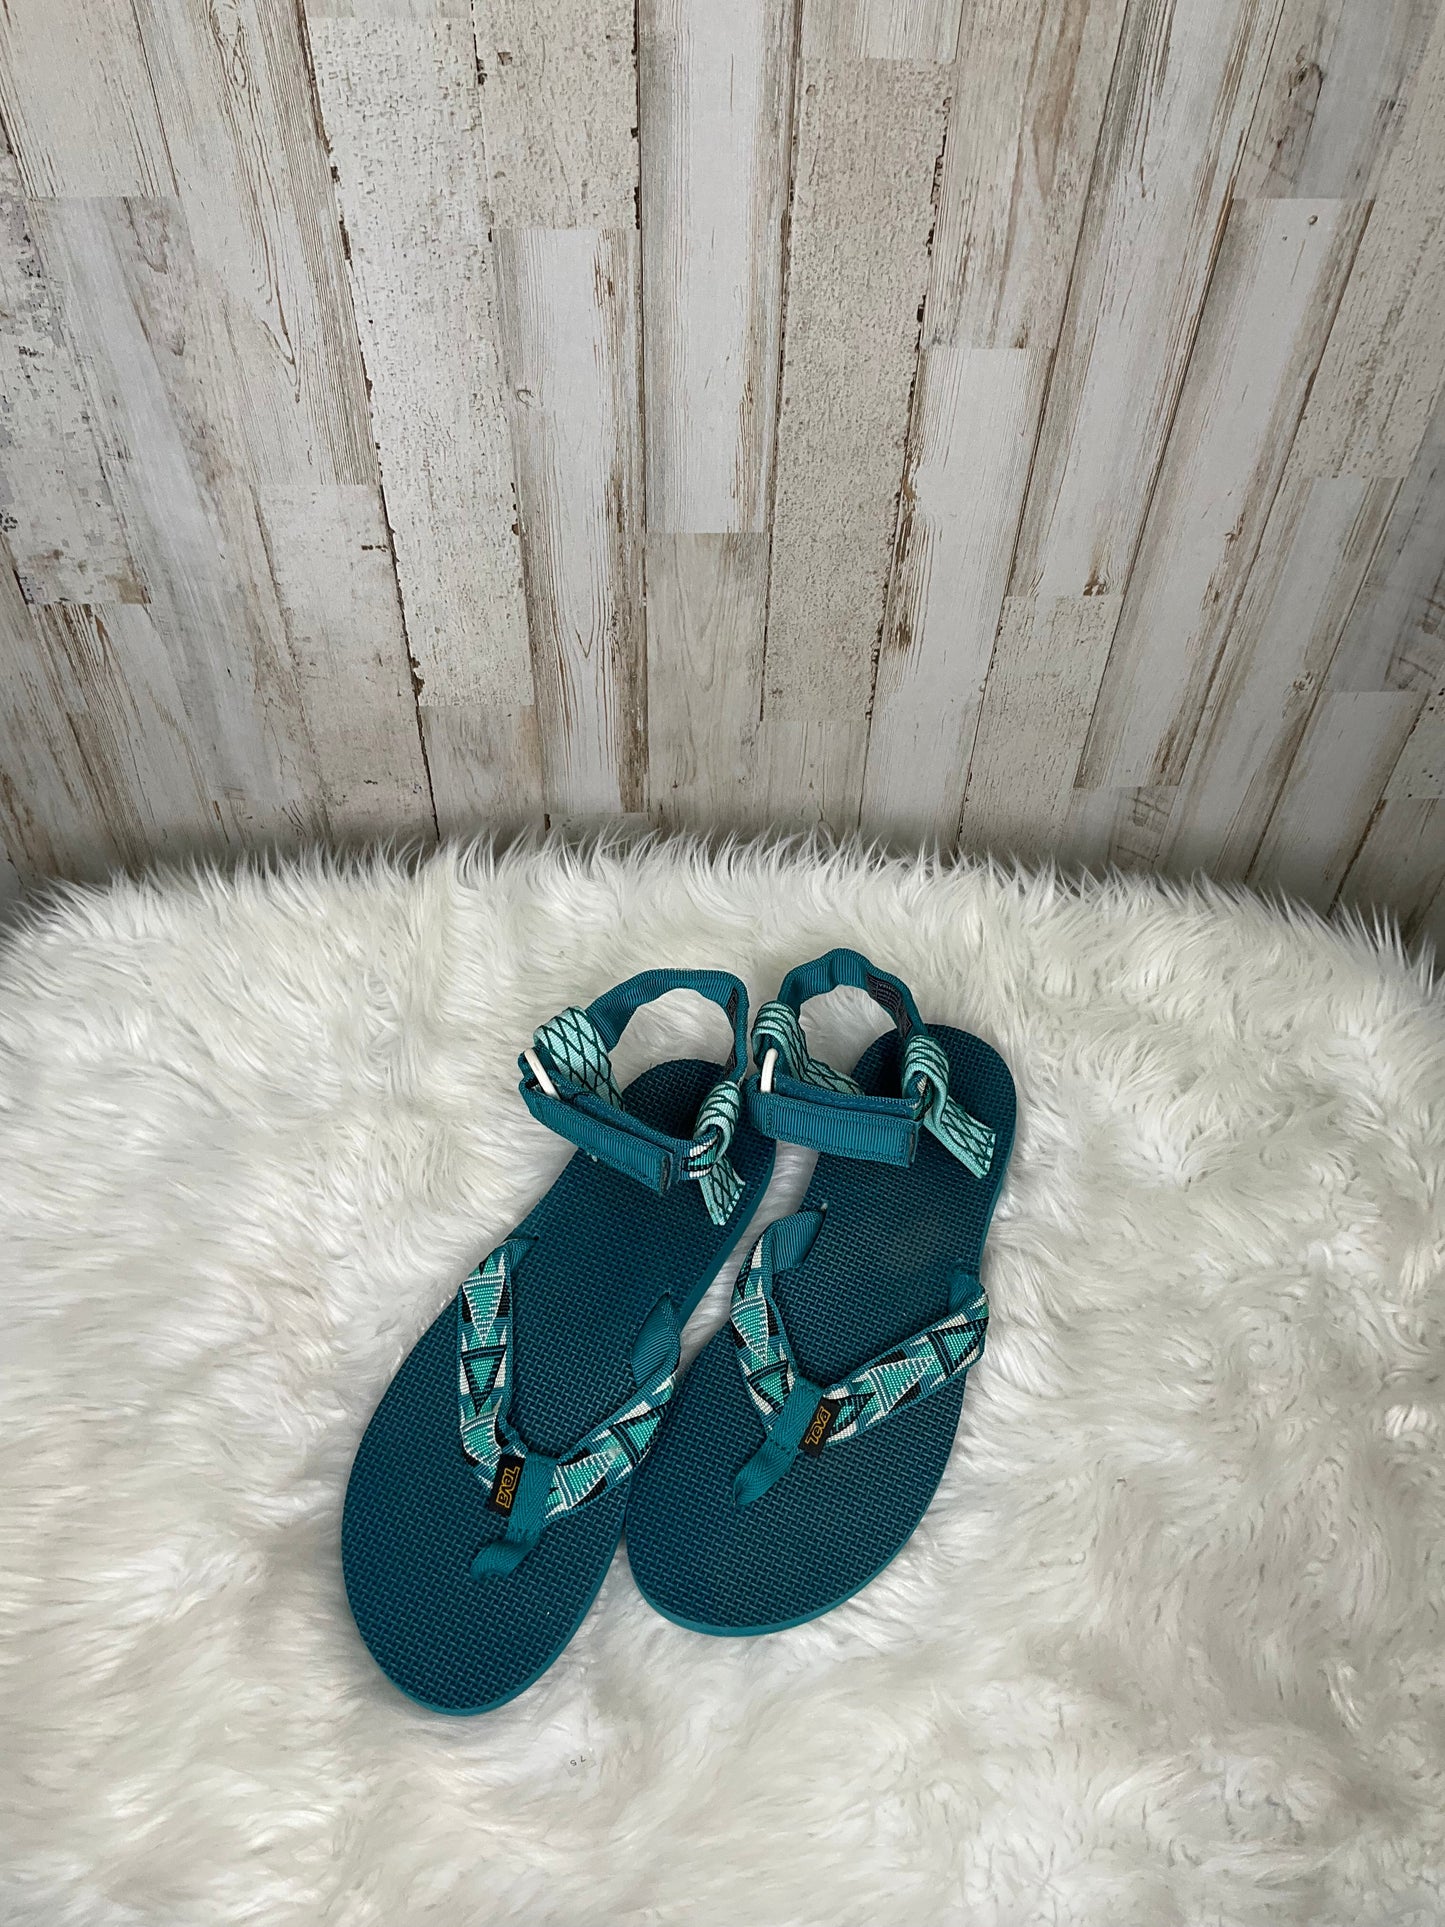 Sandals Flats By Teva  Size: 10